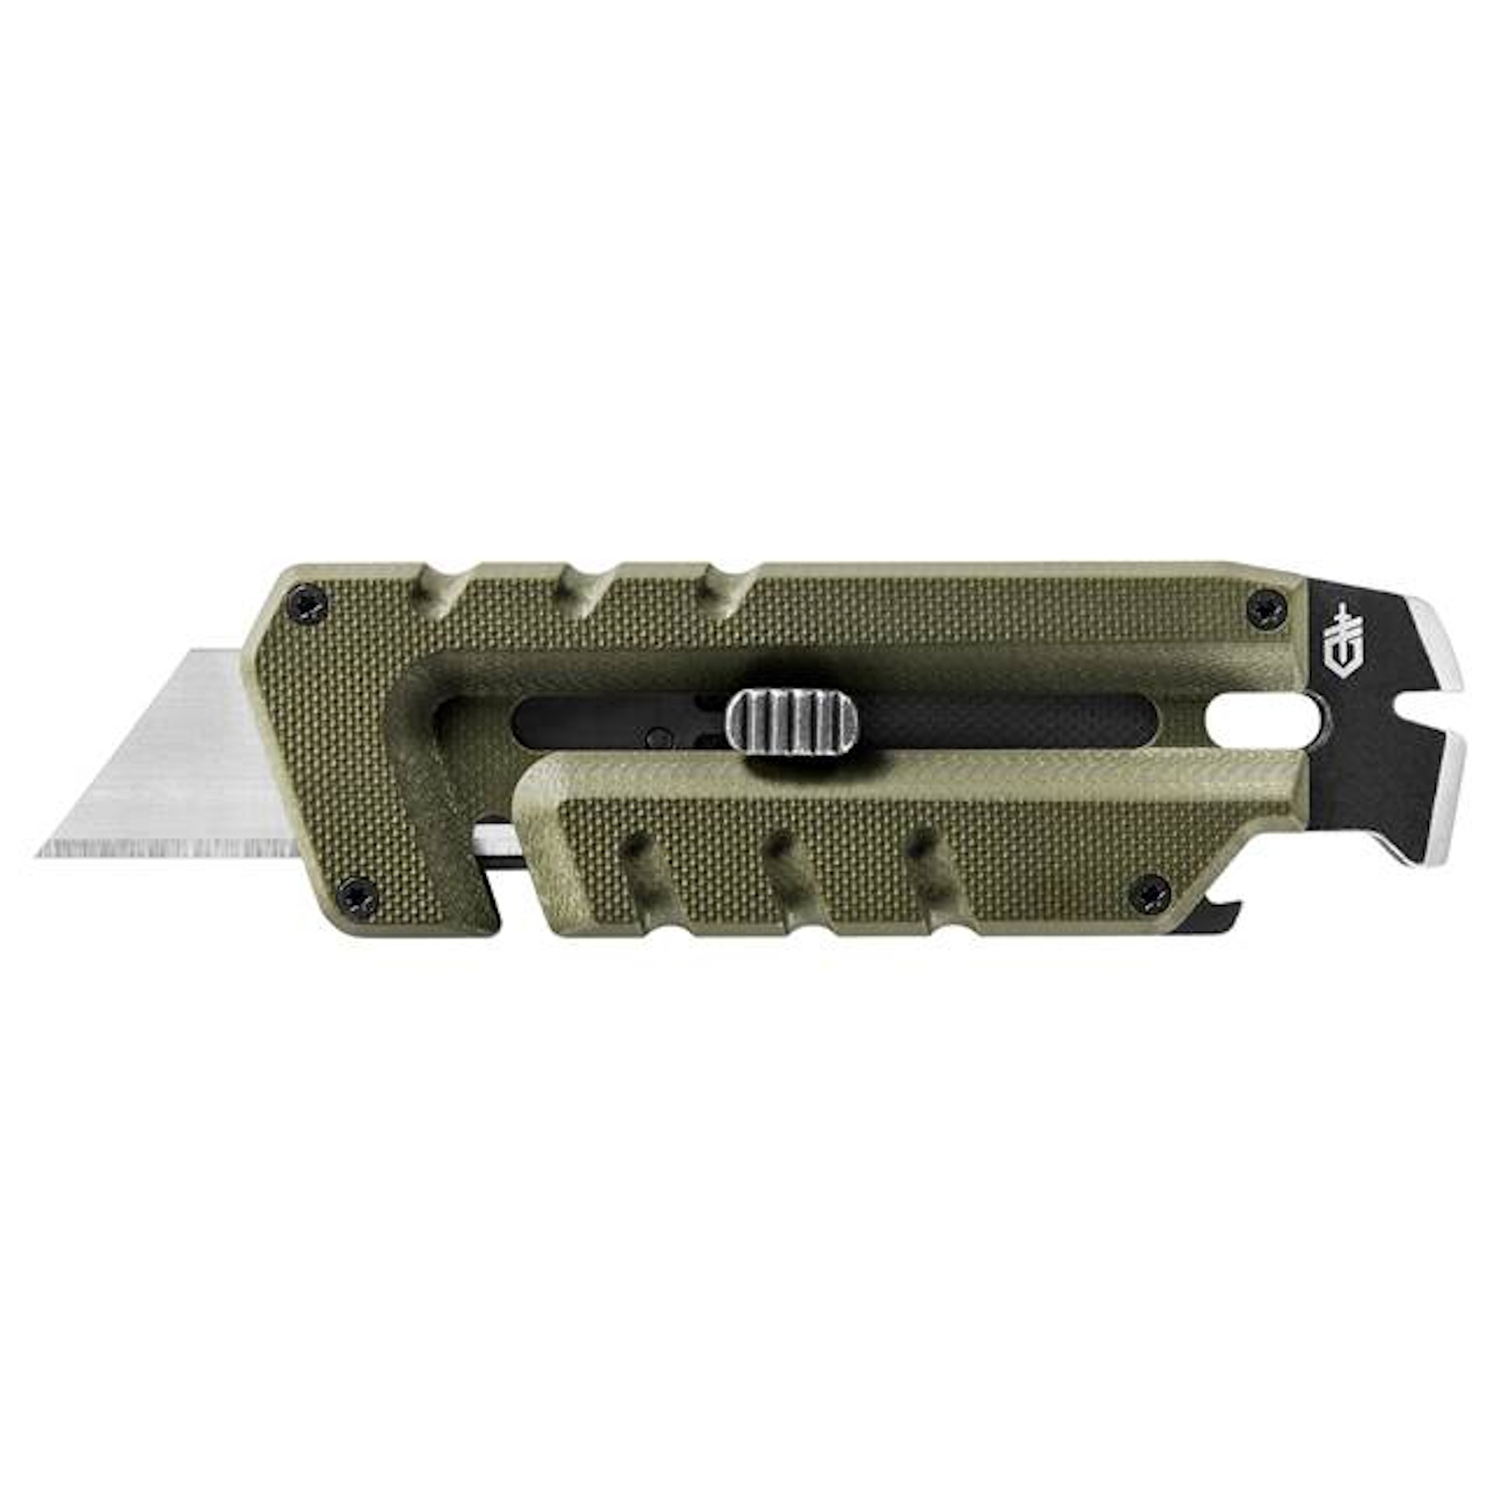 Photos - Other sporting goods Gerber Prybrid Olive Drab Green G10/Stainless Steel 4.25 in. Utility Knife 